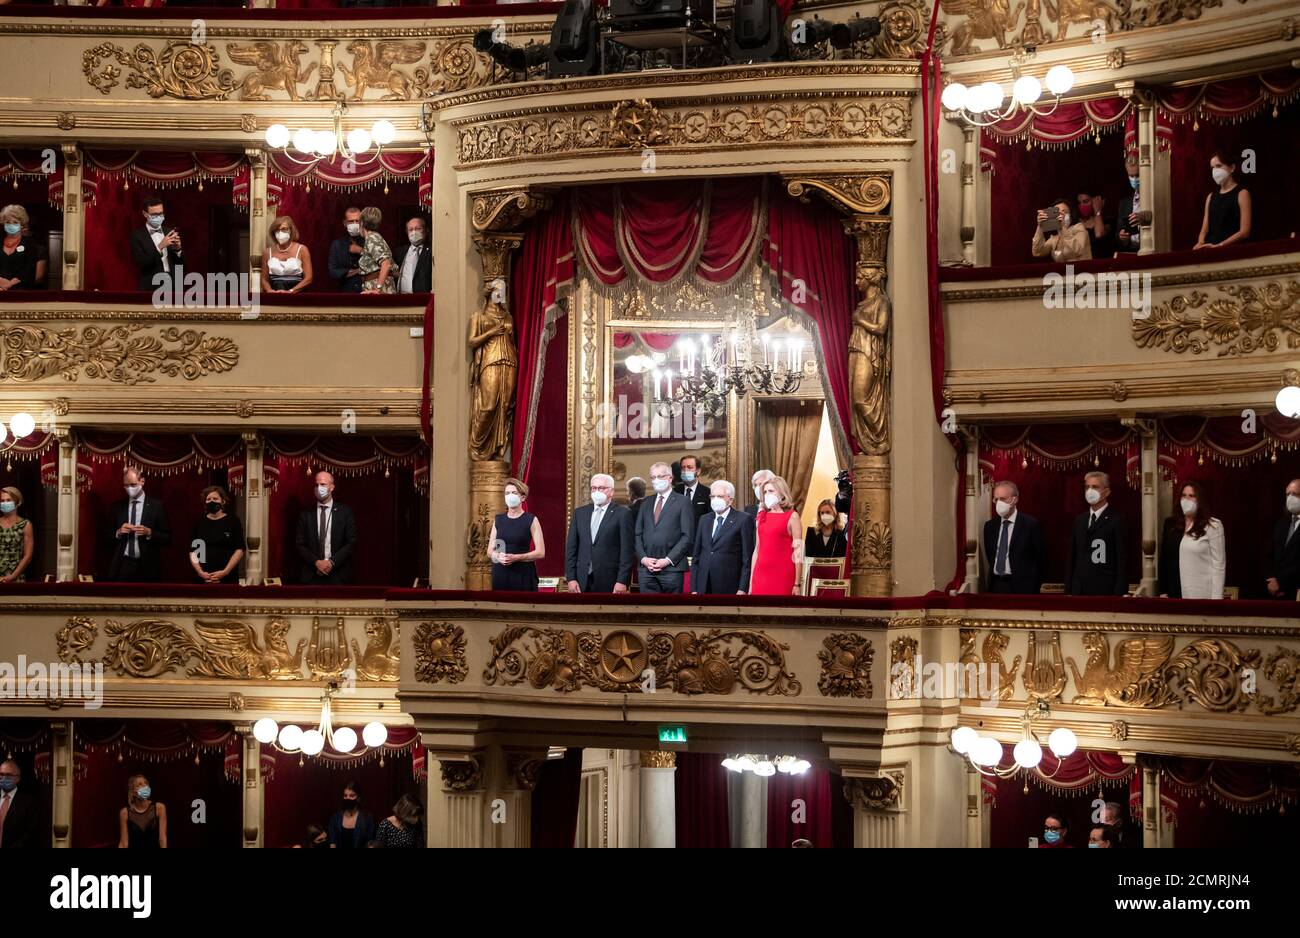 In The Box At La Scala Opera House High Resolution Stock Photography and  Images - Alamy